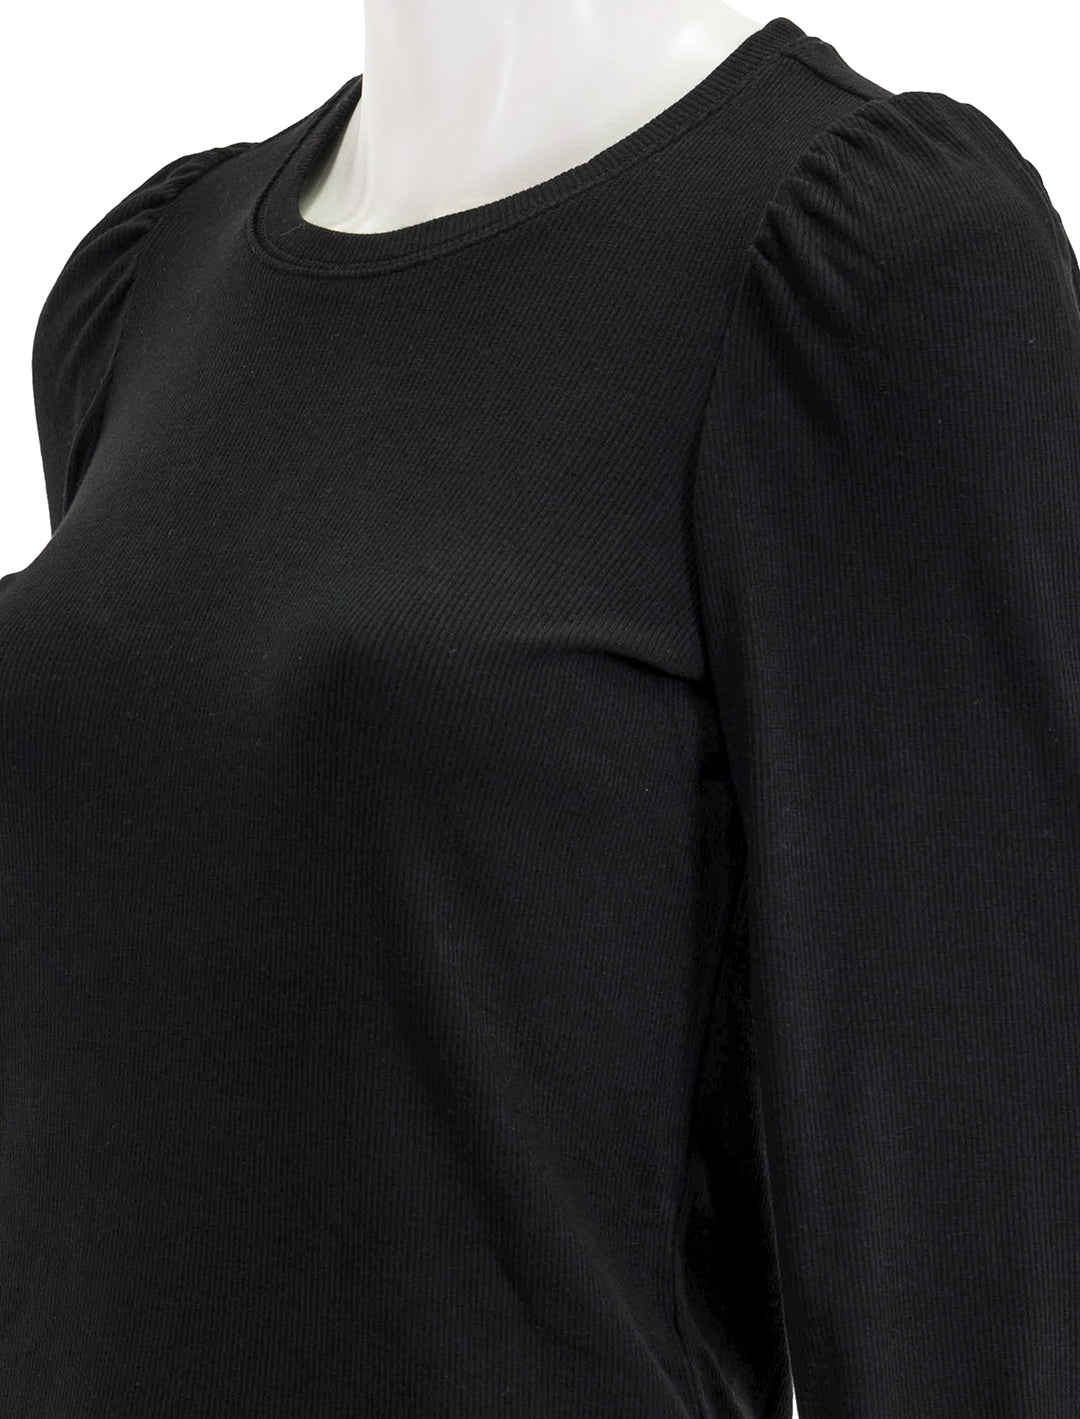 Close-up view of marine layer's lexi puff sleeve top in black.